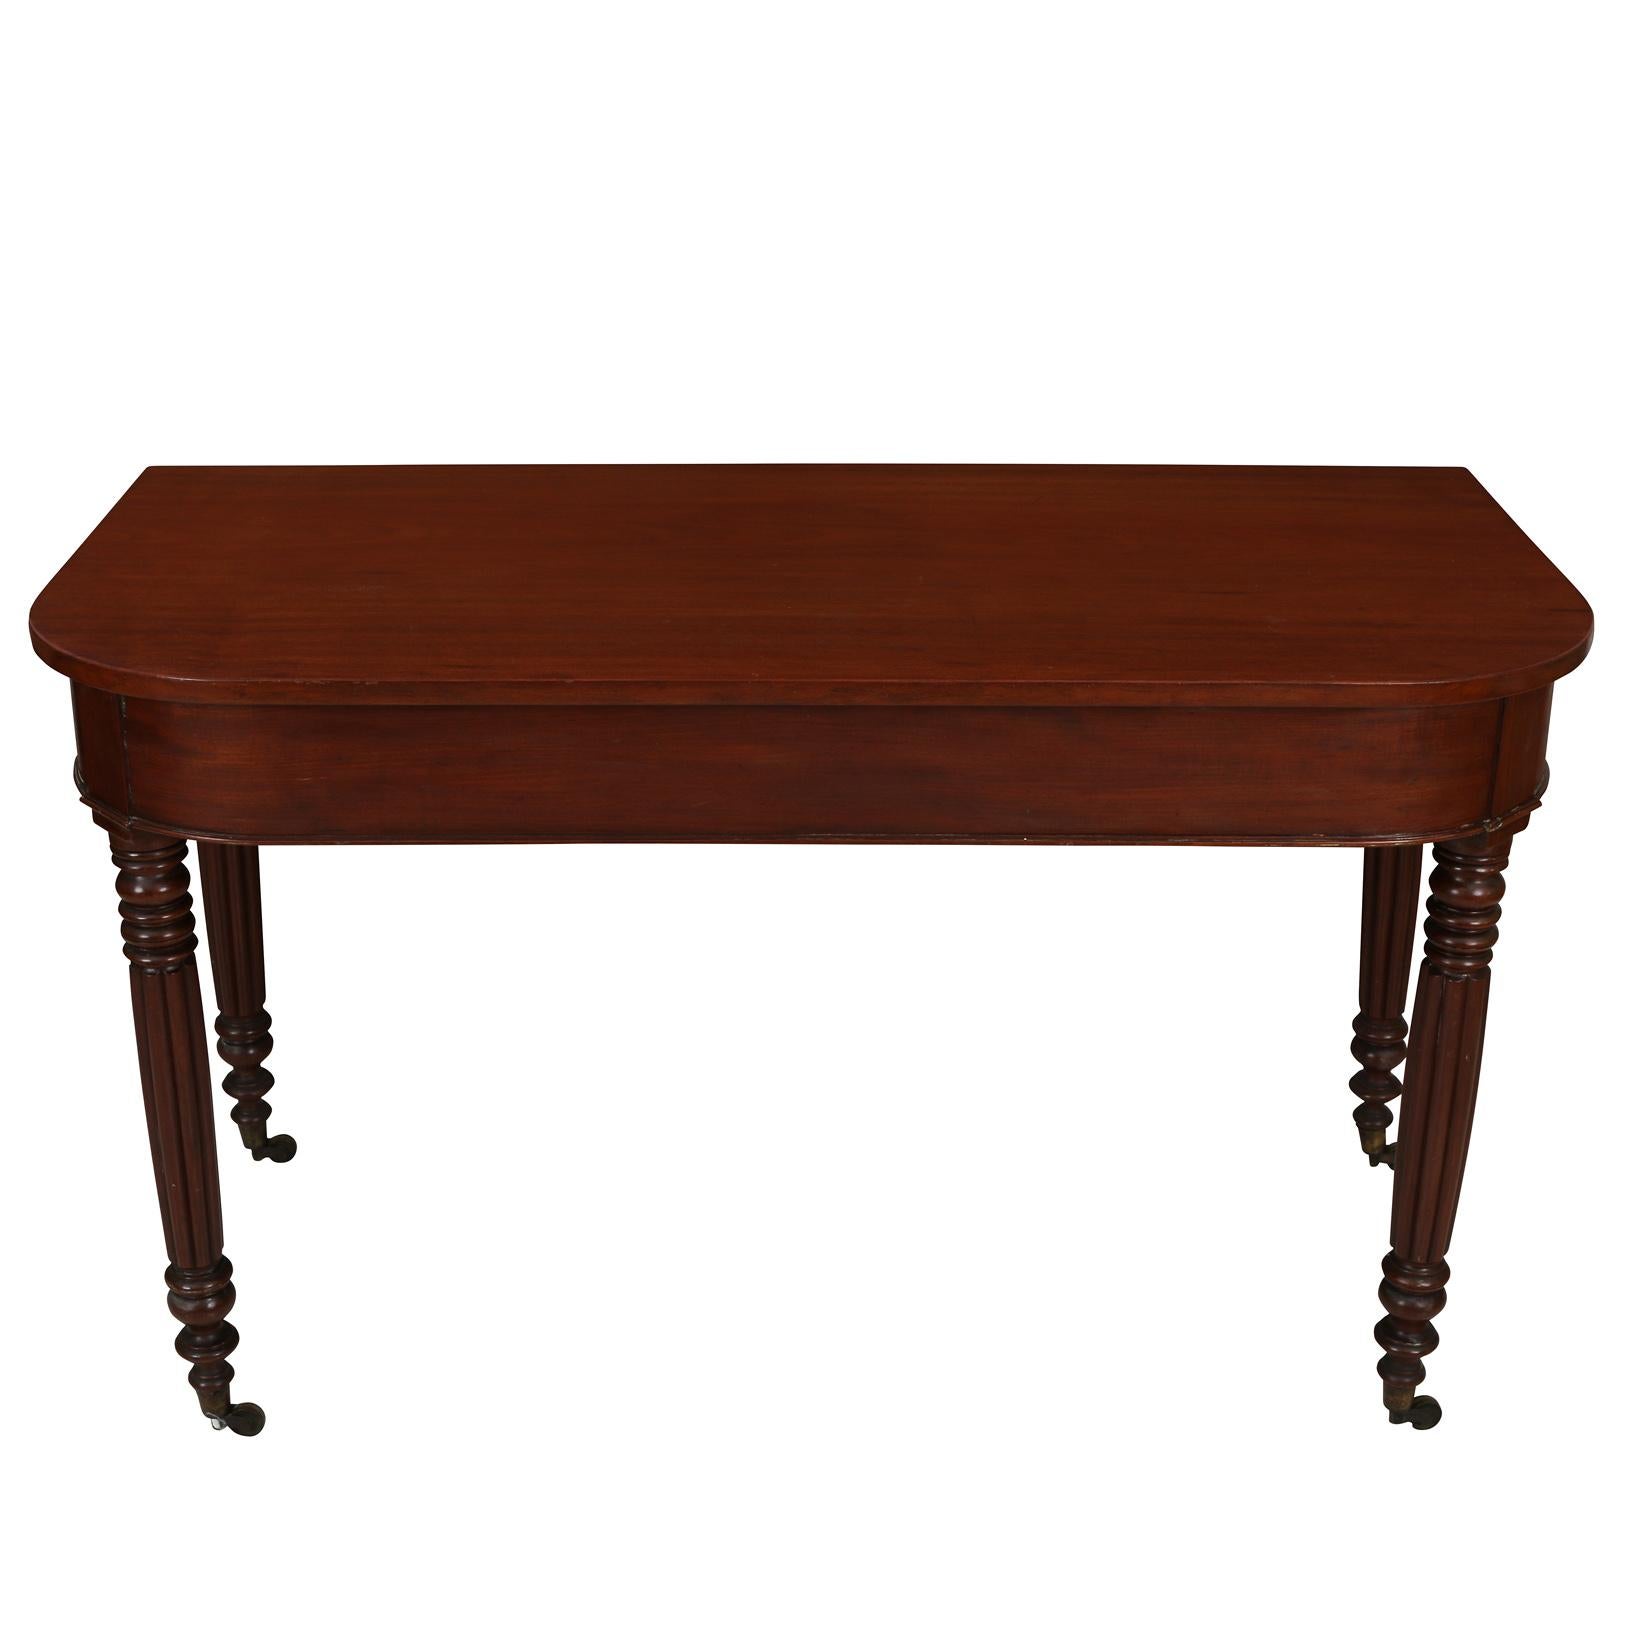 A fabulous pair of vintage mahogany demi-lune tables with fluted legs and wheels in great vintage condition, the perfect addition to your home! Would be great in a living room or dining room or entry, this pair was recently touched up and is the